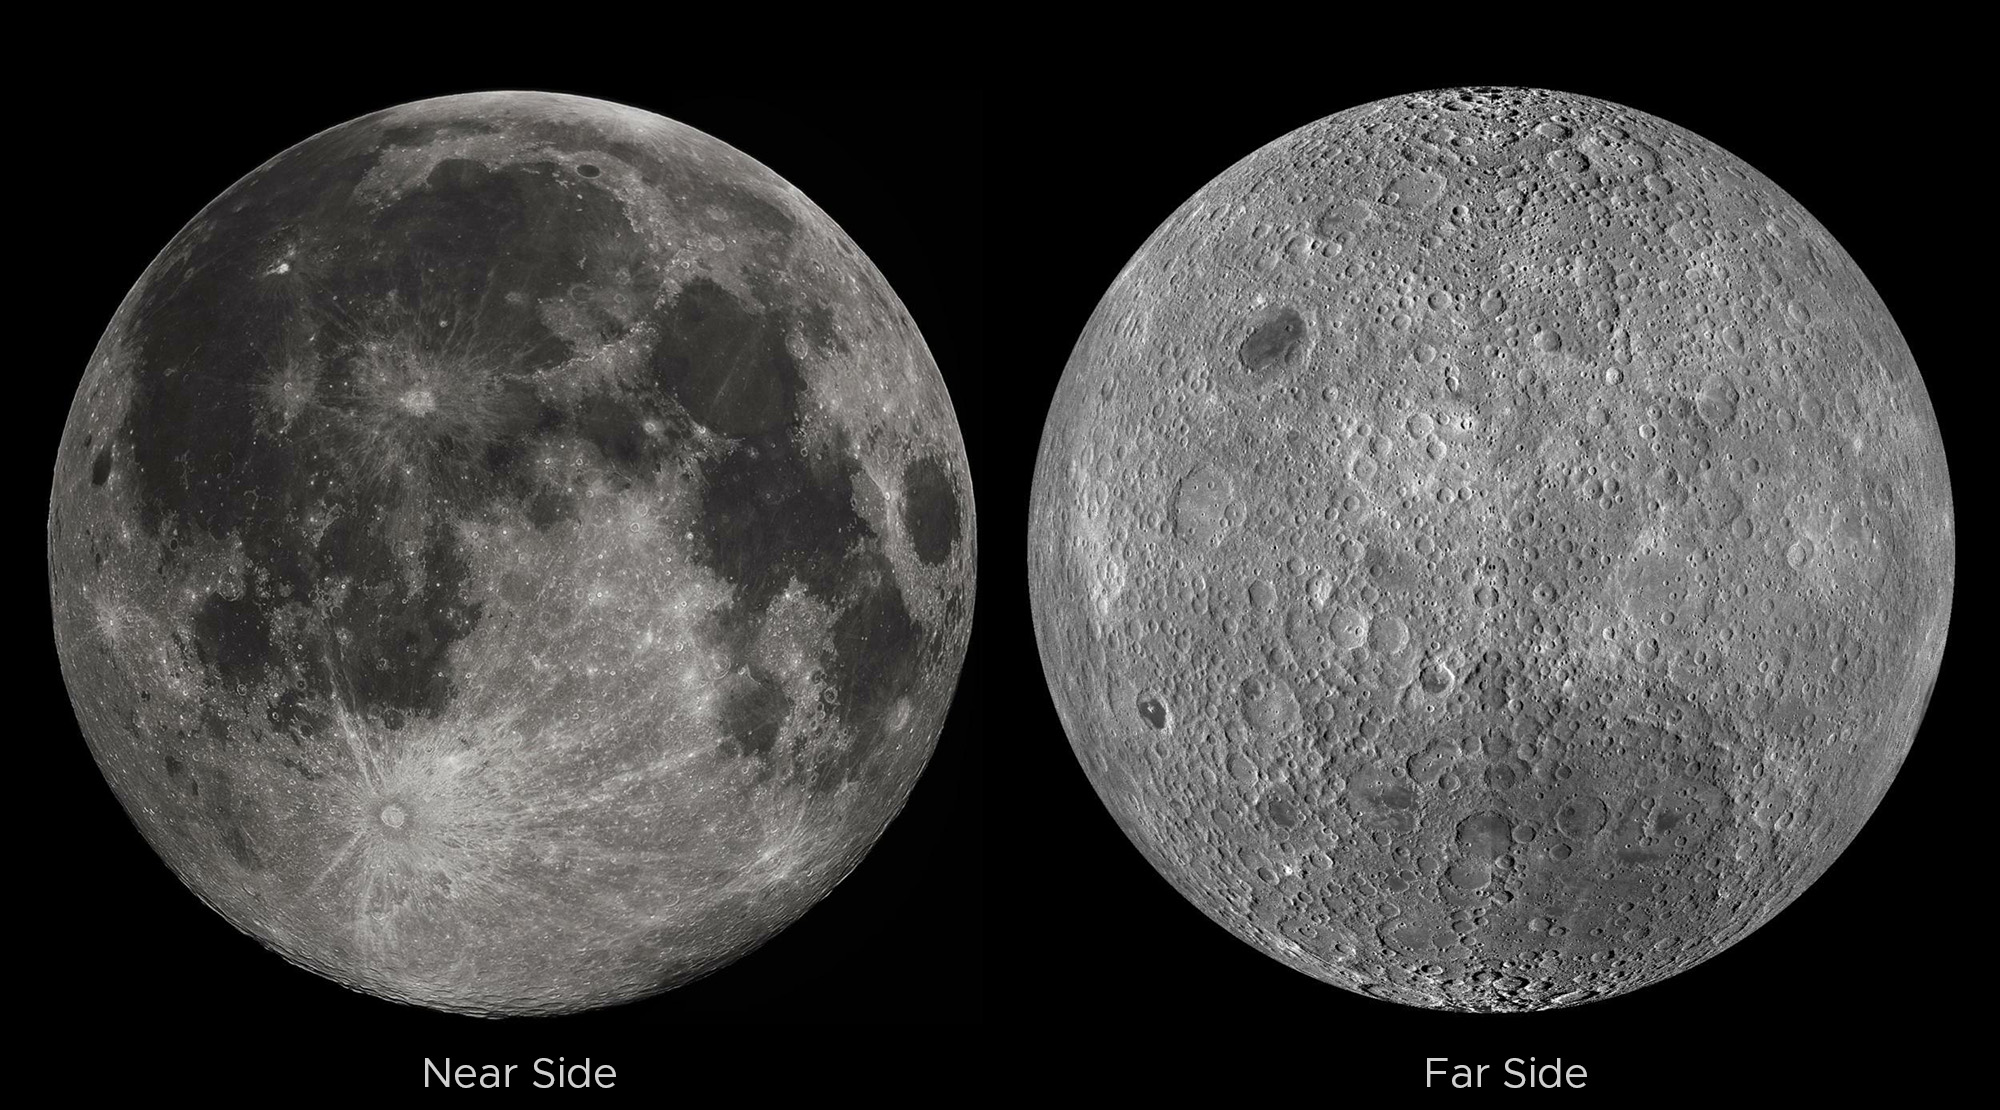 Photos of the Moon's near and far sides.